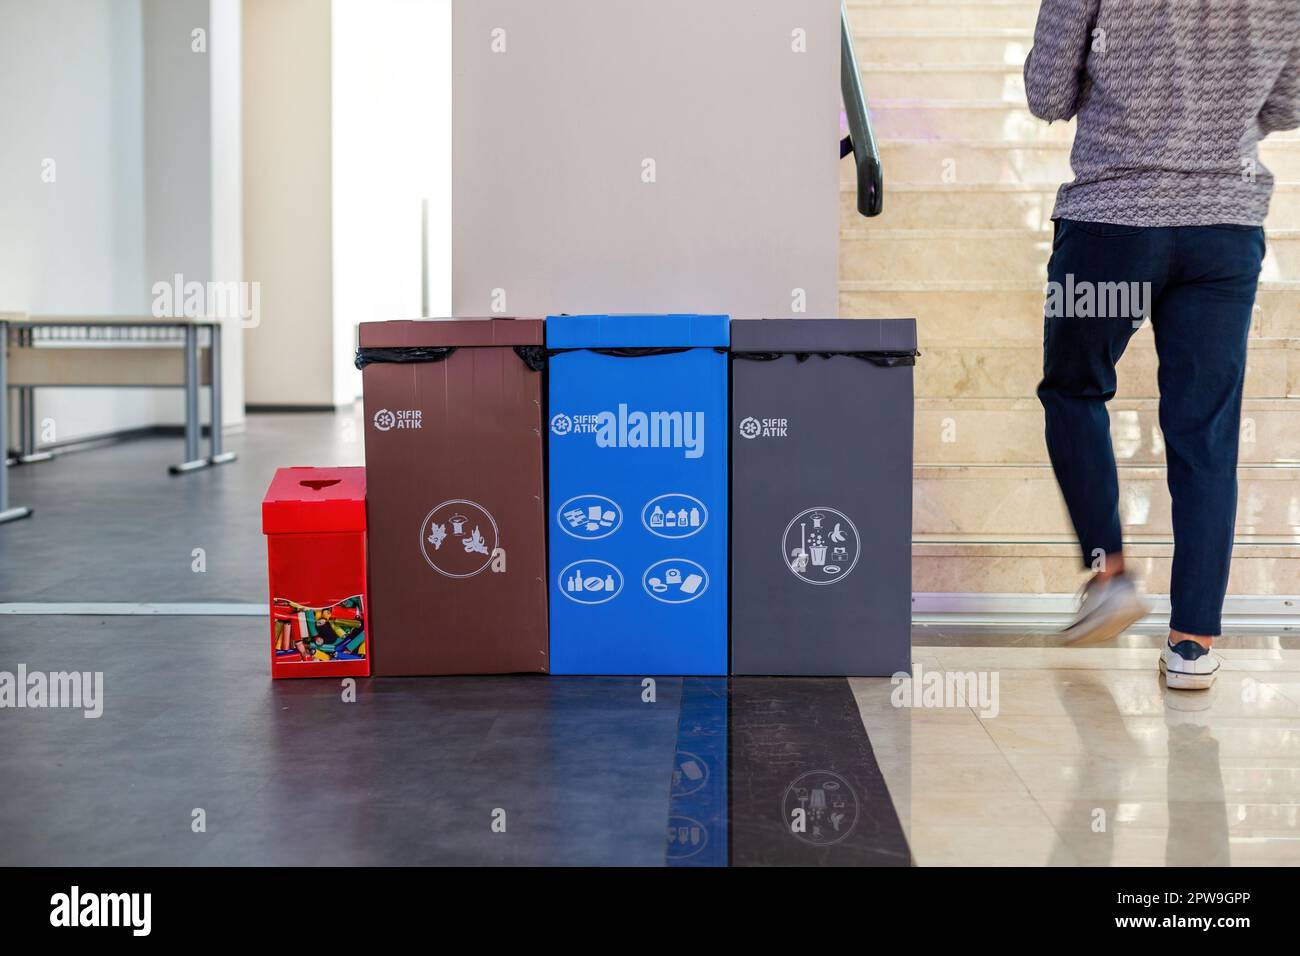 Waste sorting bins created according to the 0 Waste project in Turkey Stock Photo